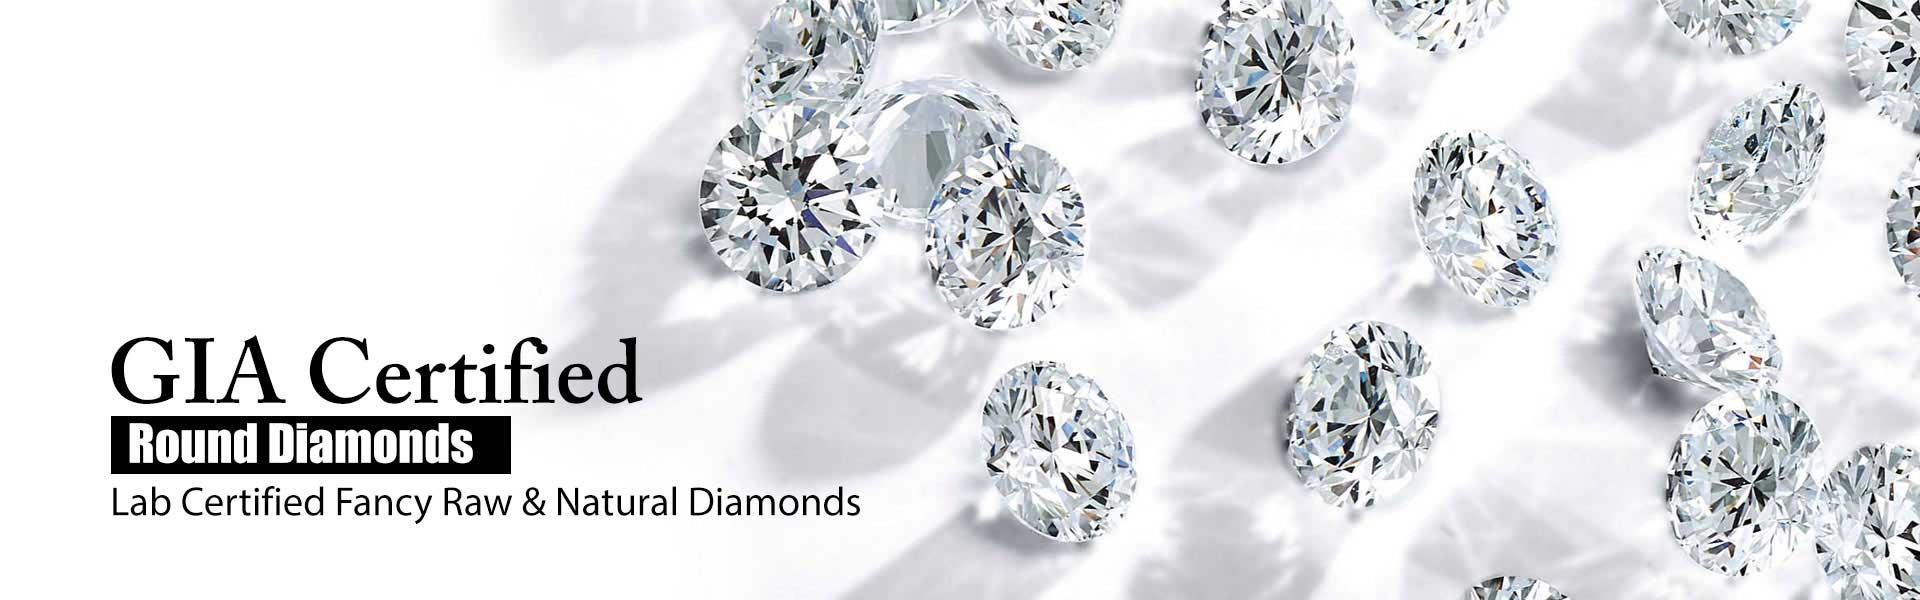  Certified Diamond  Manufacturers in New Zealand